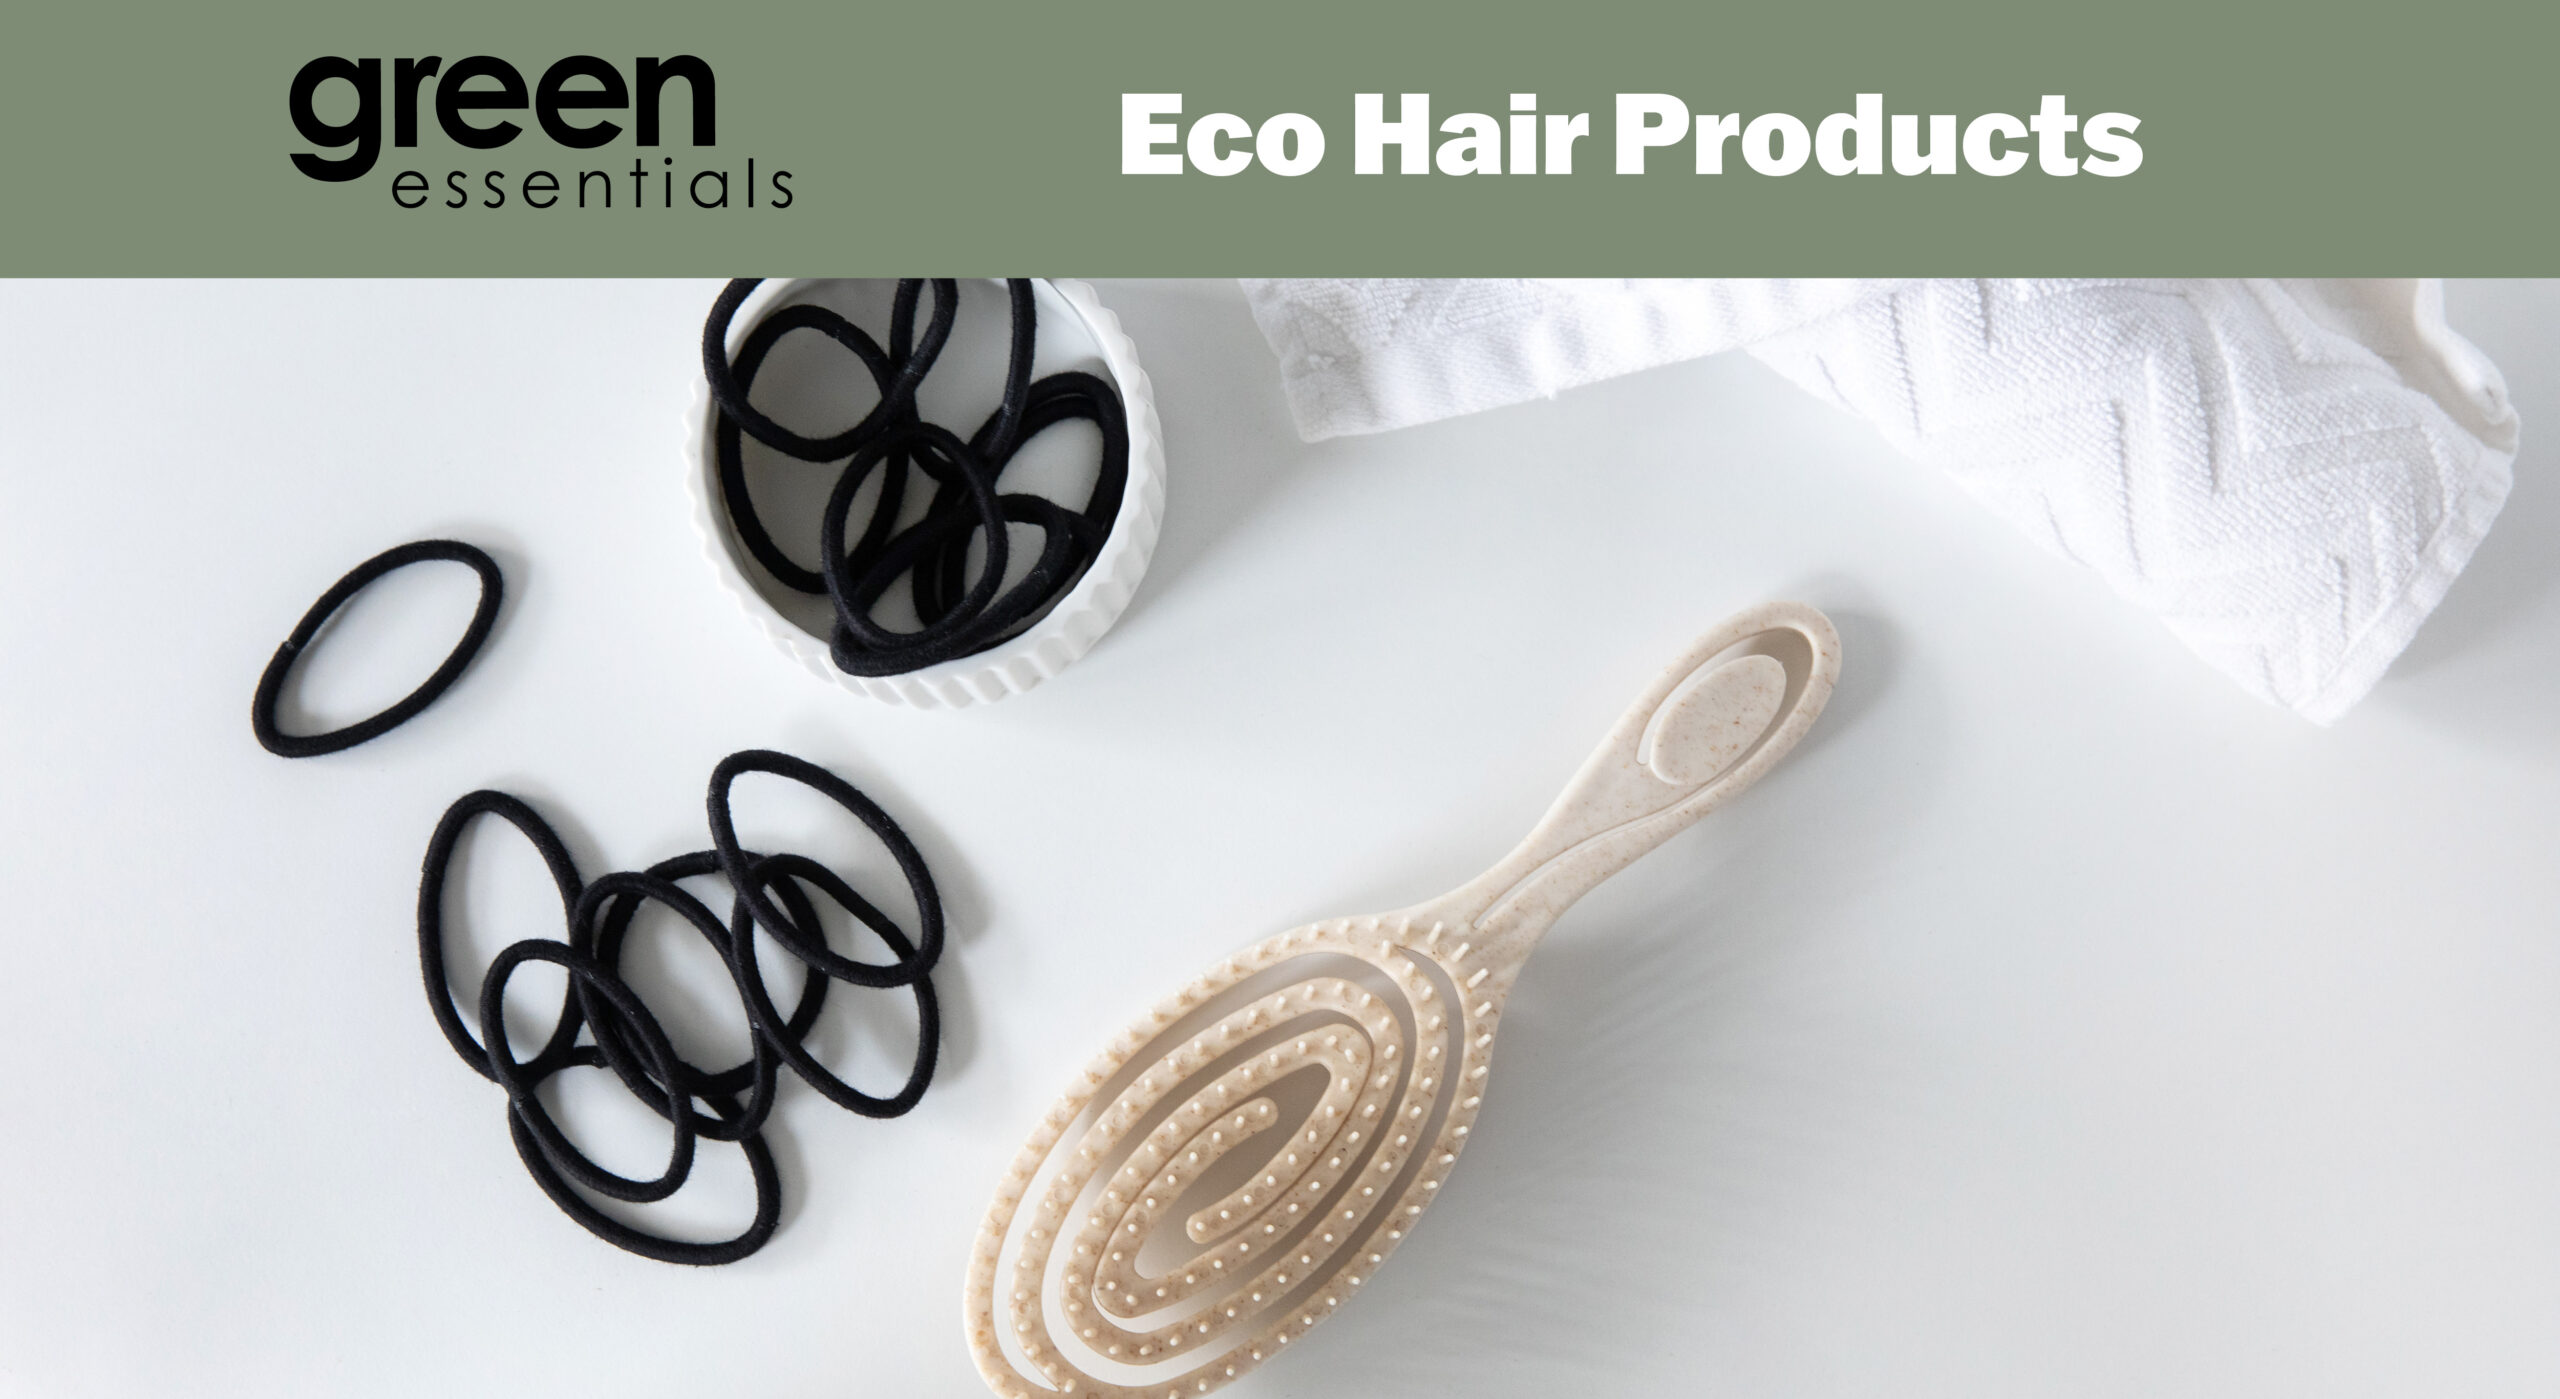 Eco Hair Products by Green Essentials